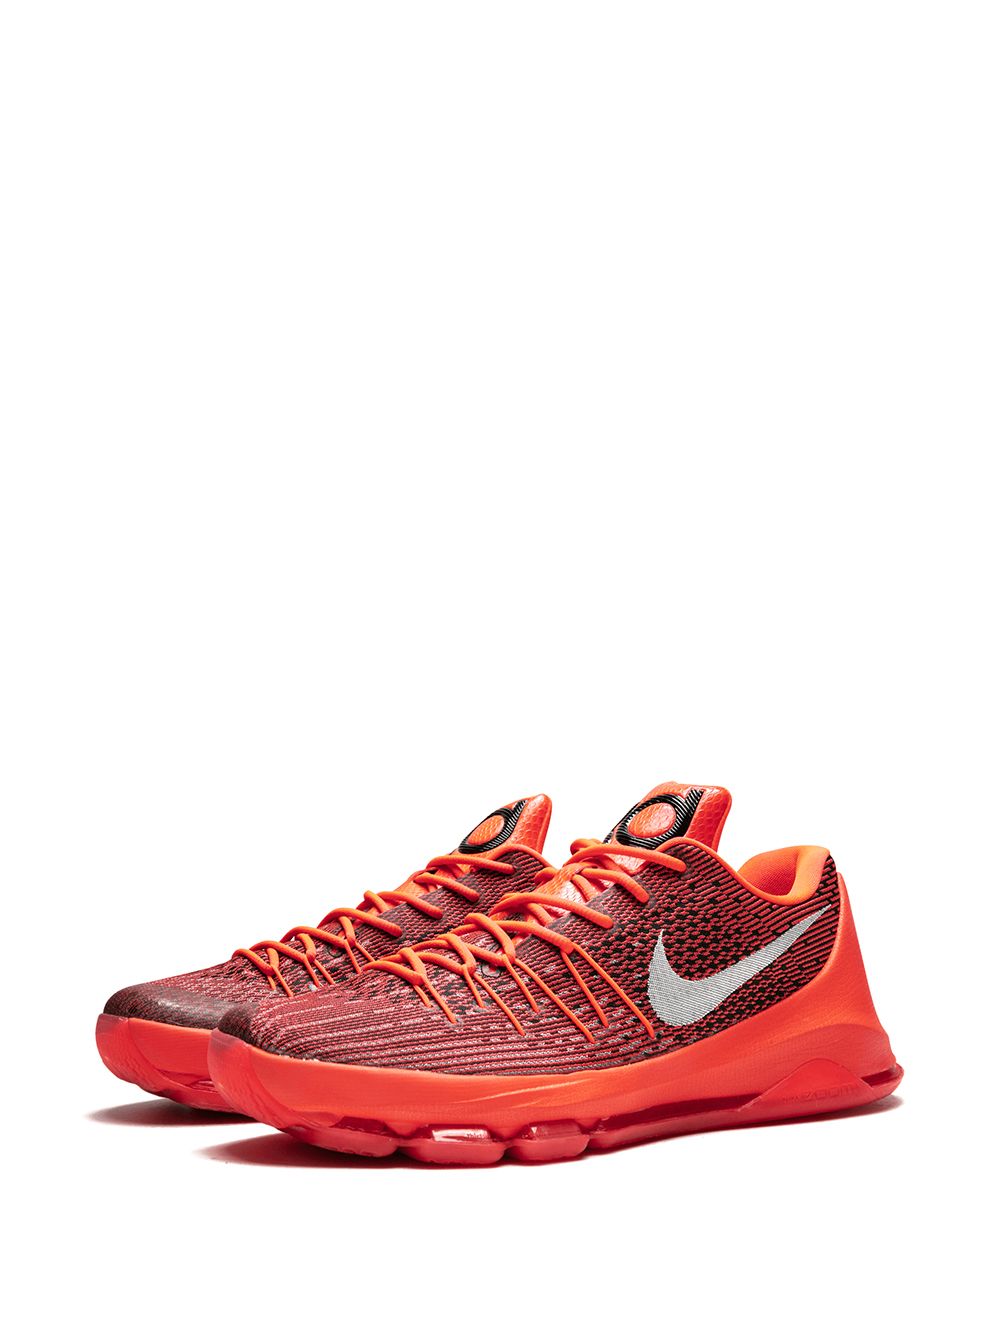 kd 8 for sale